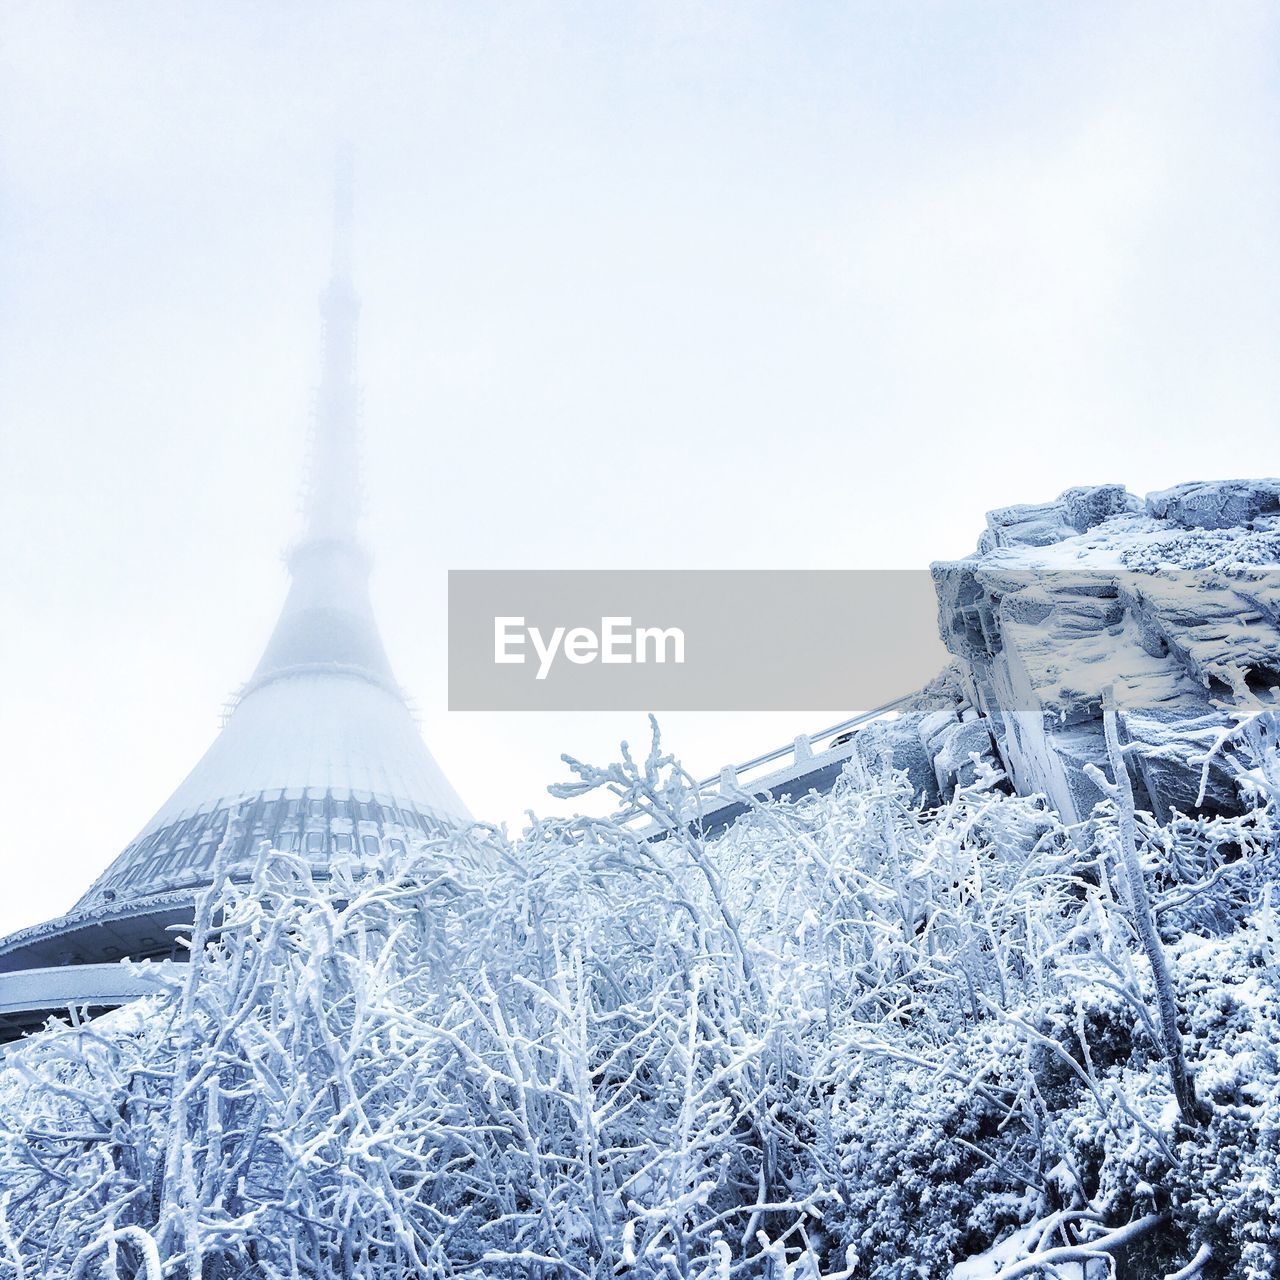 VIEW OF SNOW COVERED TOWER